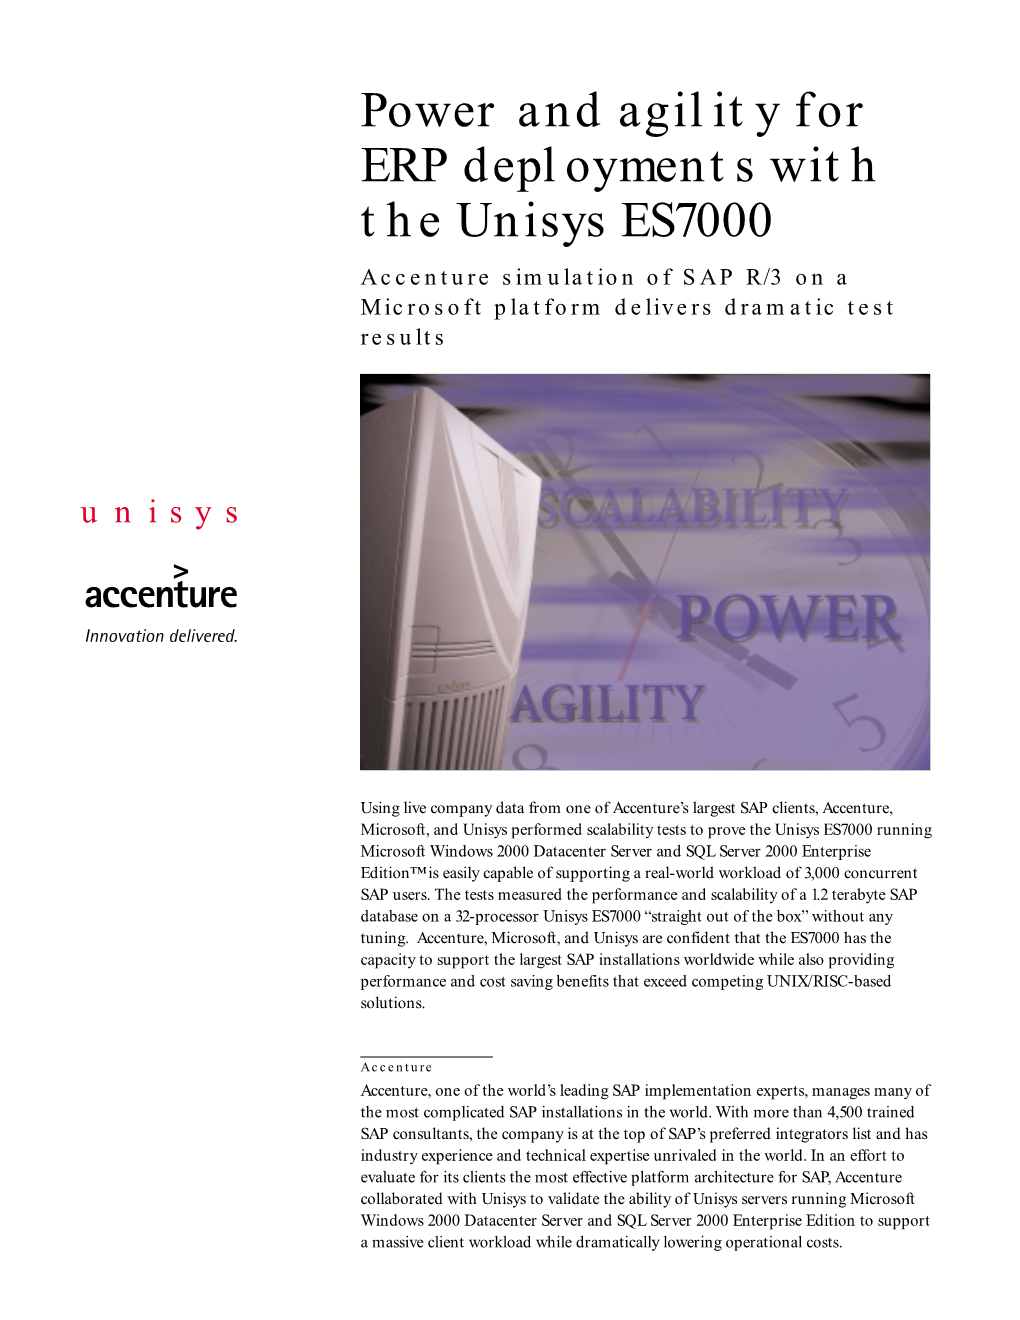 Power and Agility for ERP Deployments with the Unisys ES7000